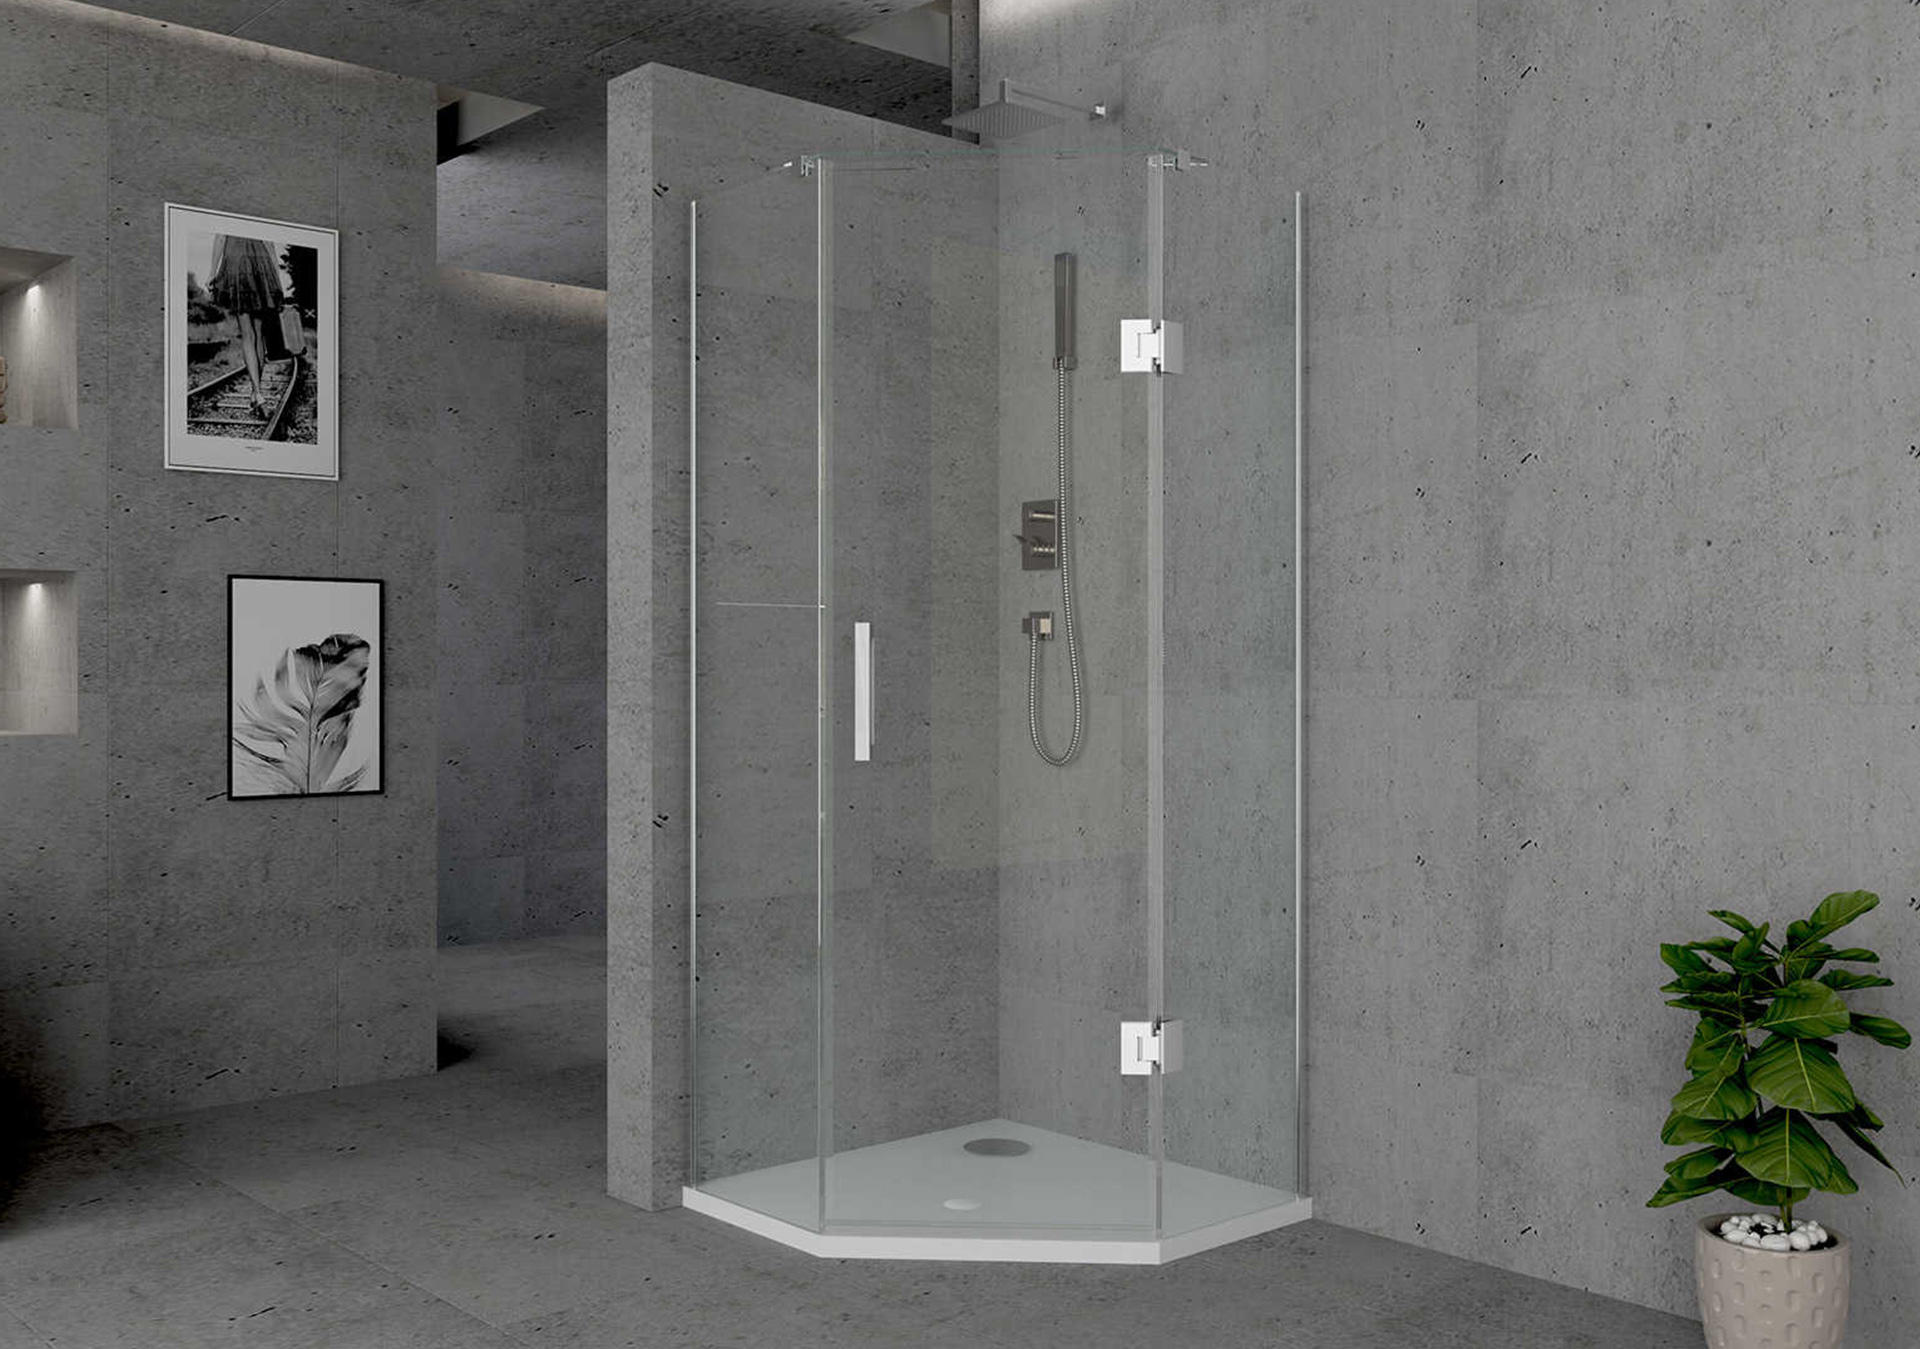 Can I customize the design of my shower enclosure?